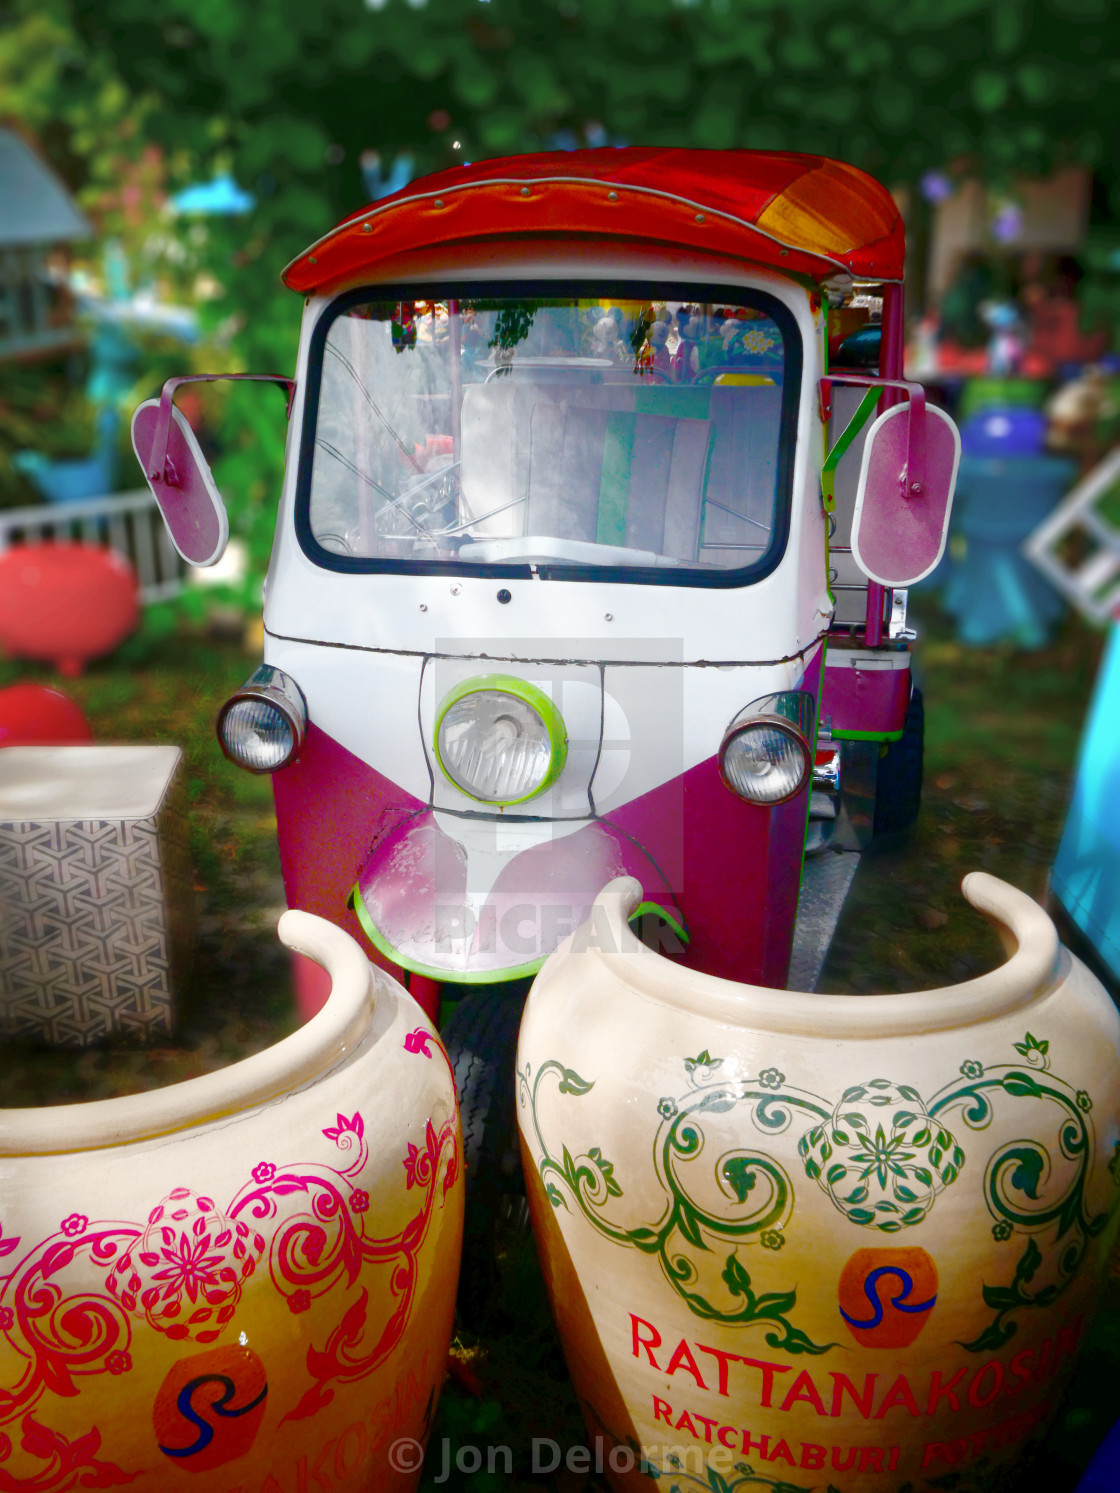 "Giant garden pots and a classic Tuc Tuc" stock image